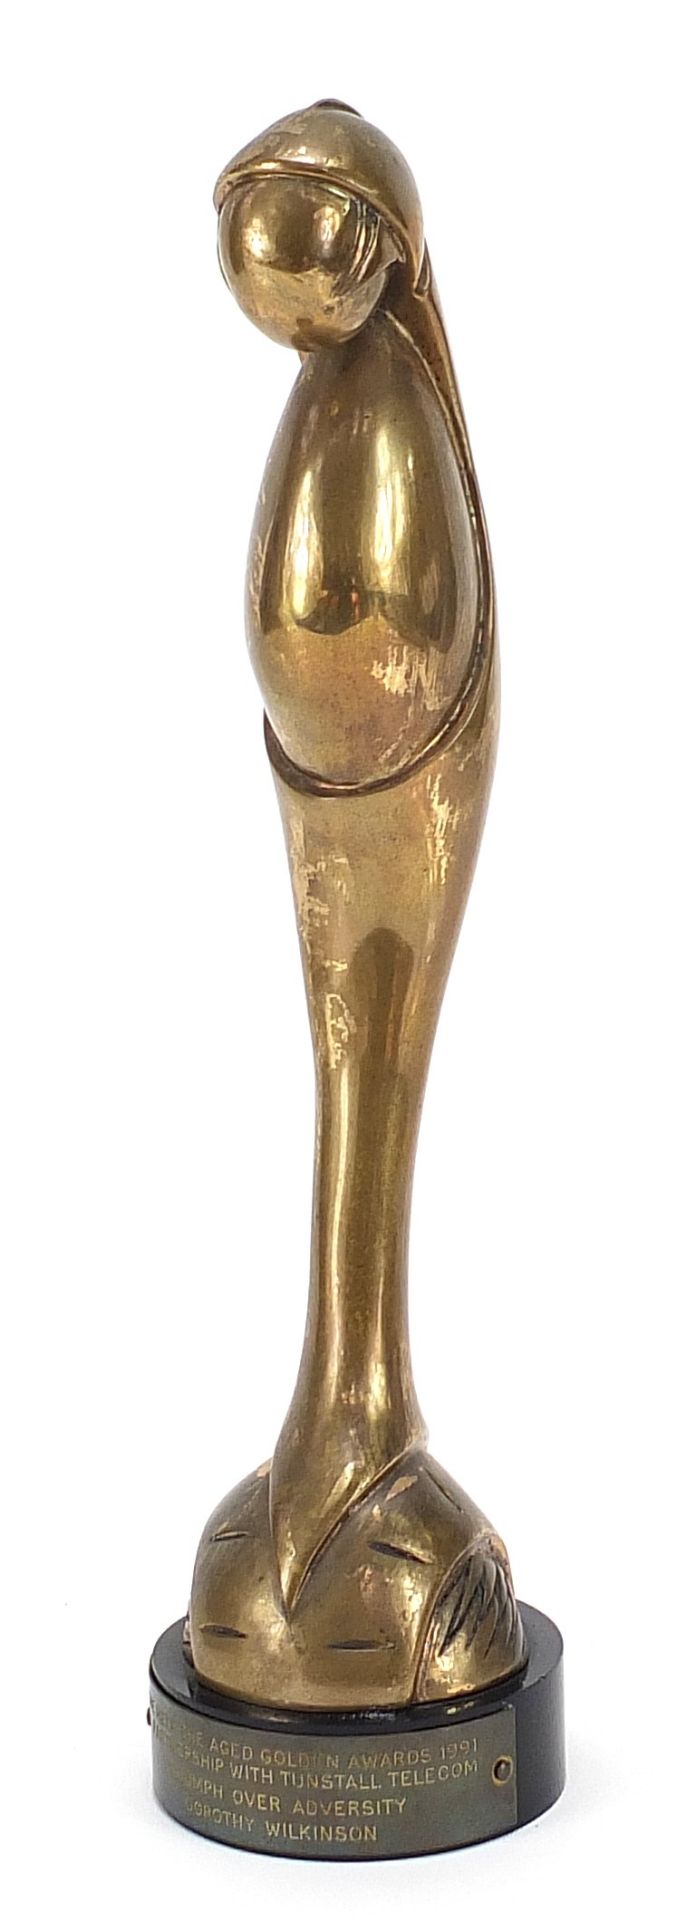 The Golden Awards Modernist patinated bronze sculpture by Shenda Amery presented to Dorothy